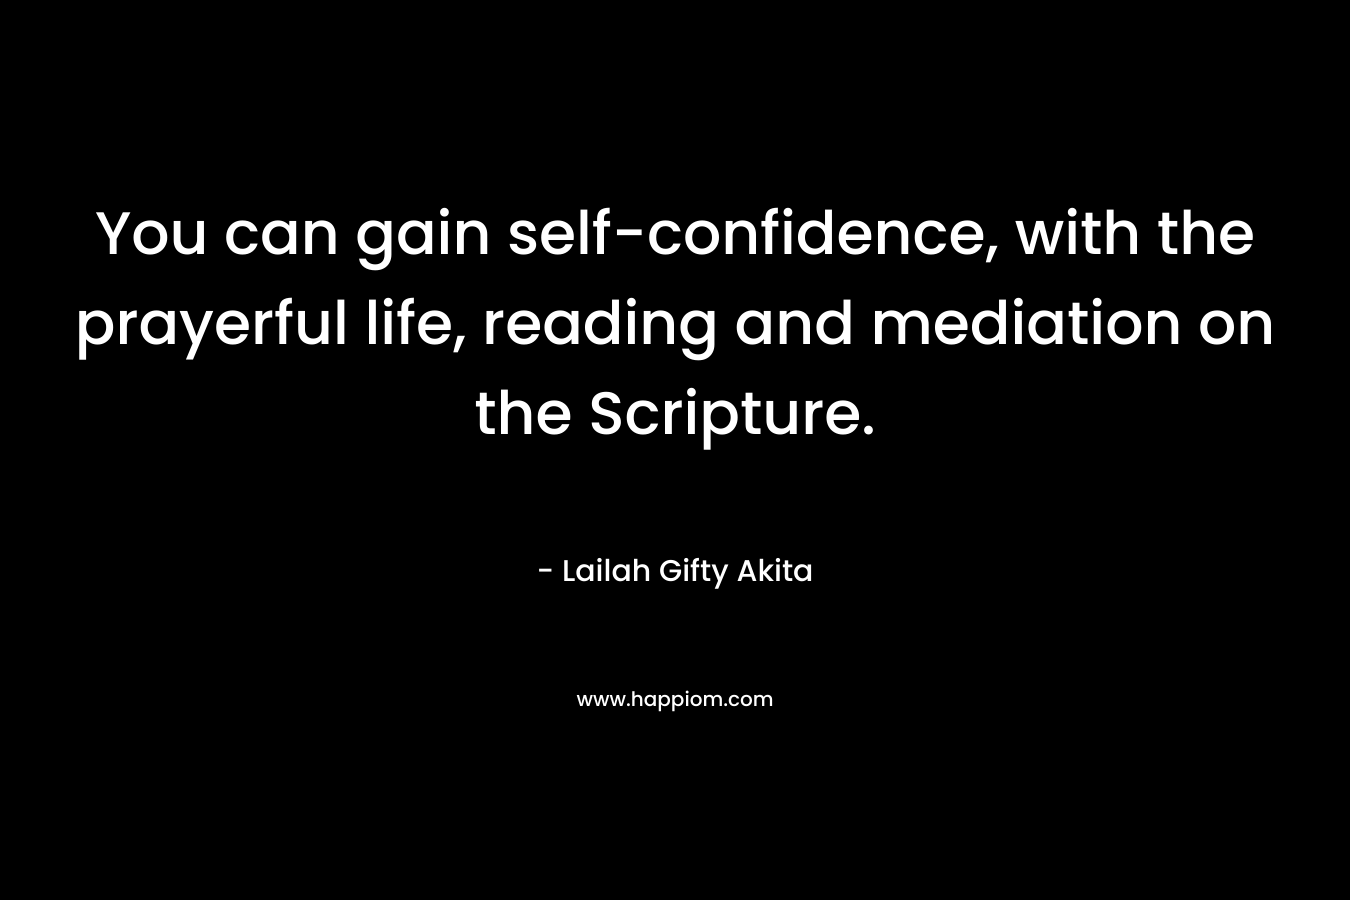 You can gain self-confidence, with the prayerful life, reading and mediation on the Scripture.